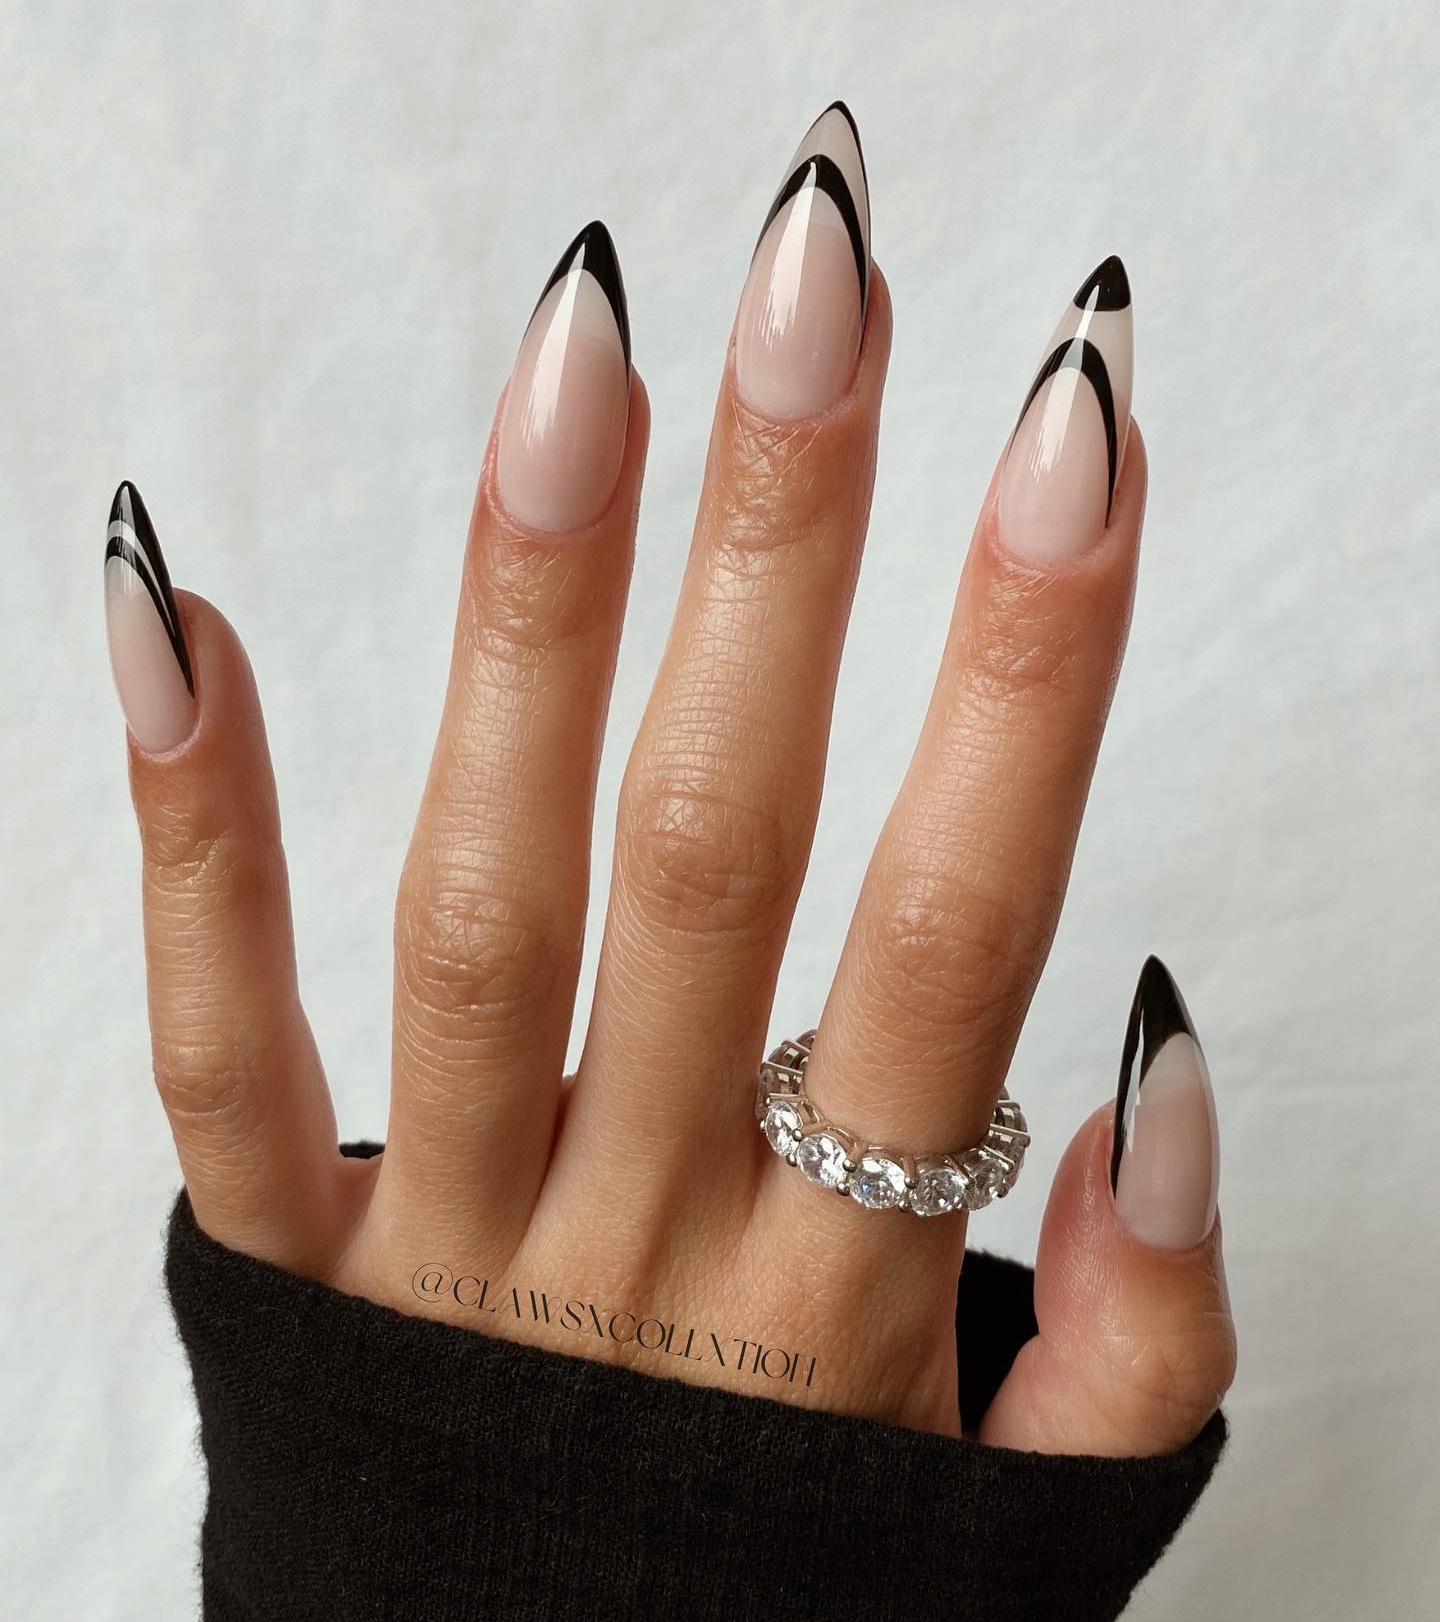 Long Stiletto Black and White French Nails